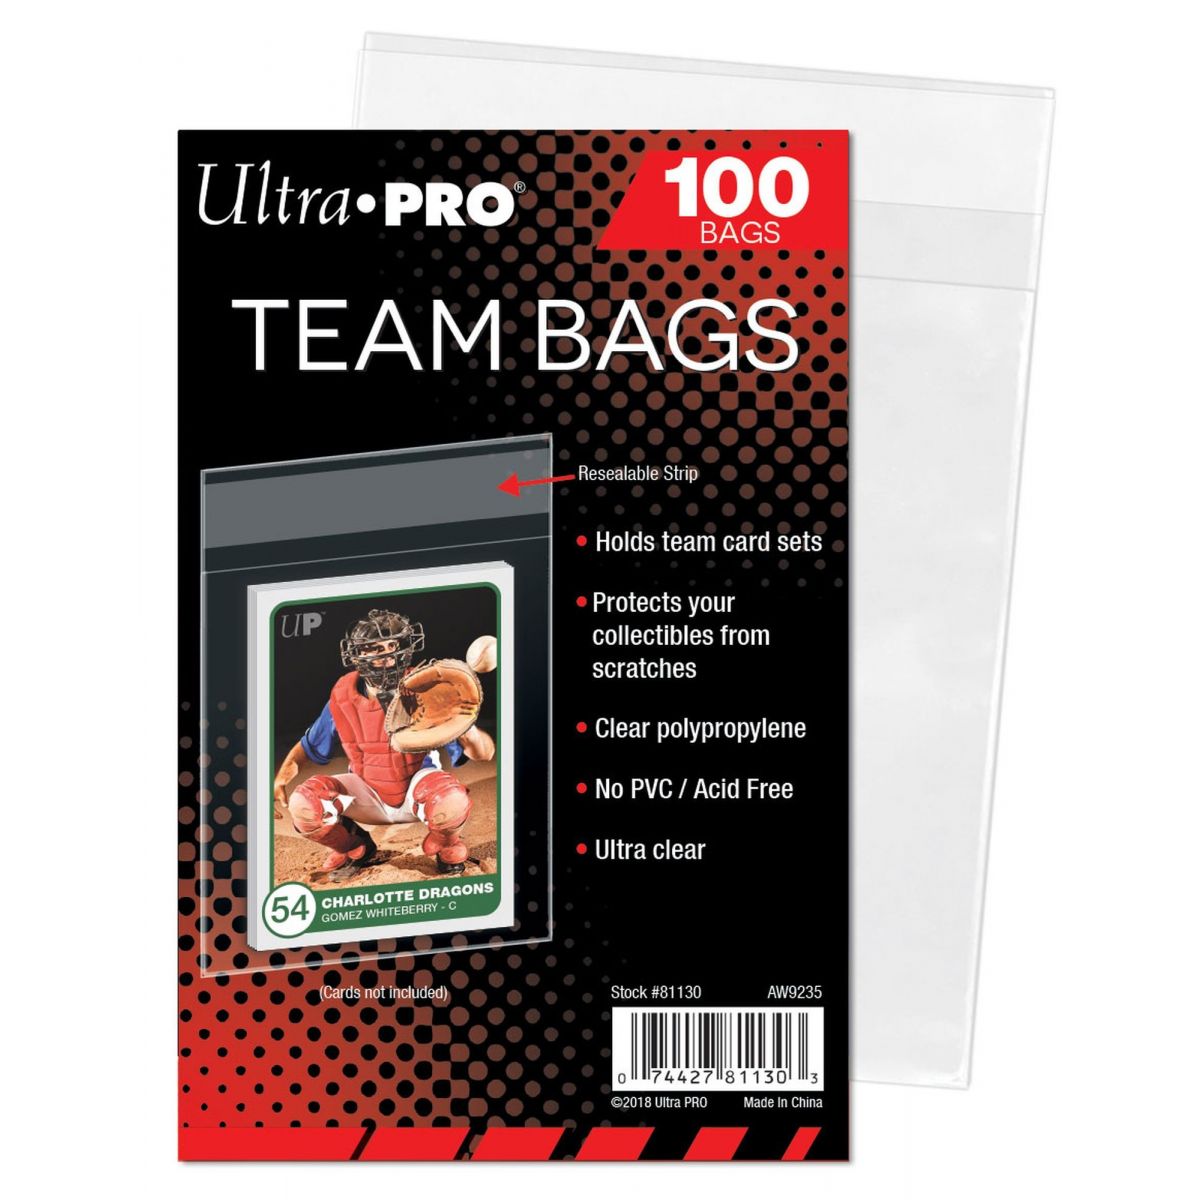 Ultra Pro - Team Bags - Resealable - Top Loader Resealable Sleeves (100)